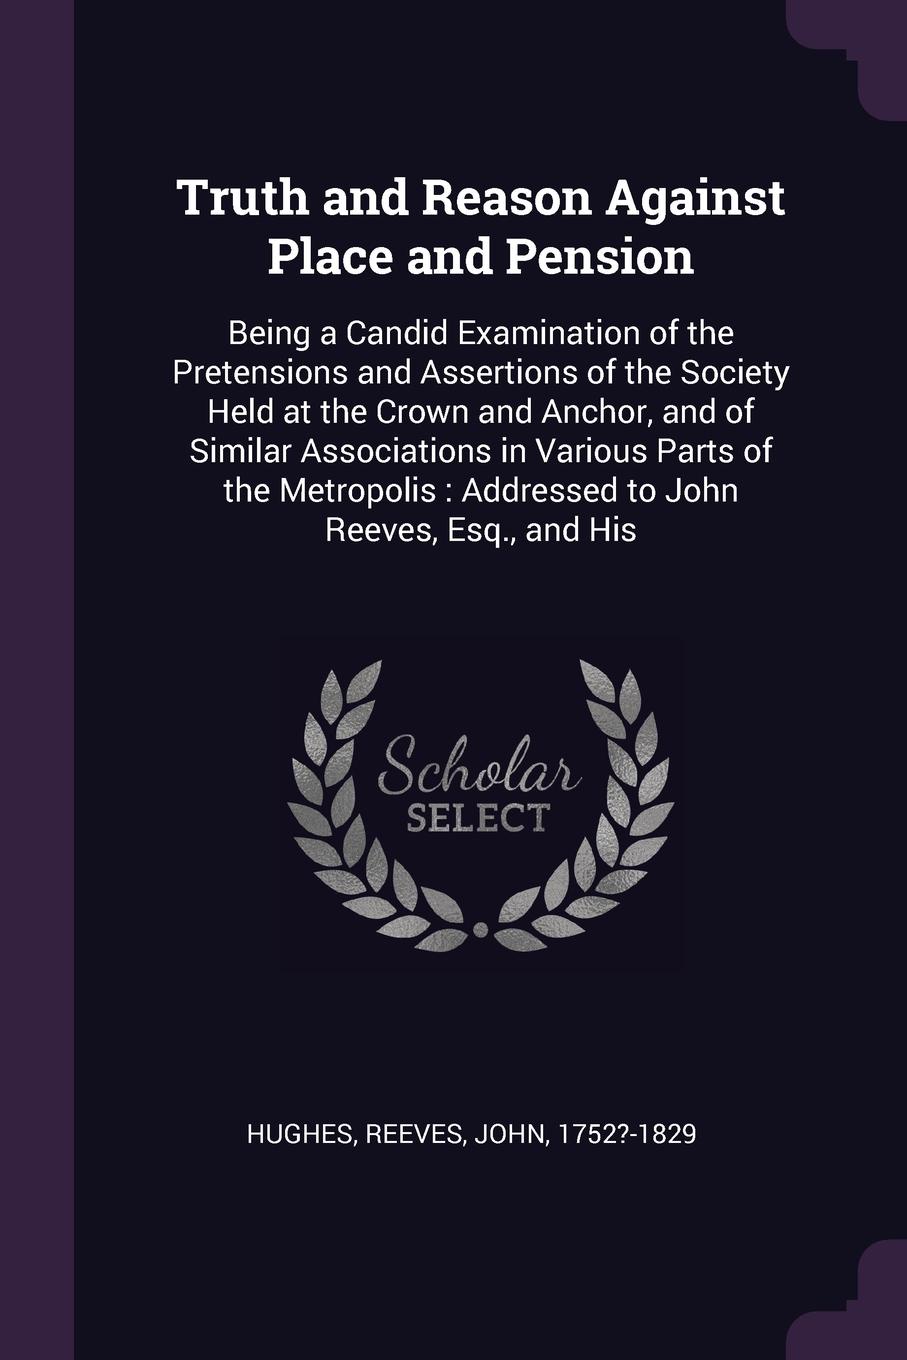 Truth and Reason Against Place and Pension. Being a Candid Examination of the Pretensions and Assertions of the Society Held at the Crown and Anchor, and of Similar Associations in Various Parts of the Metropolis : Addressed to John Reeves, Esq., ...